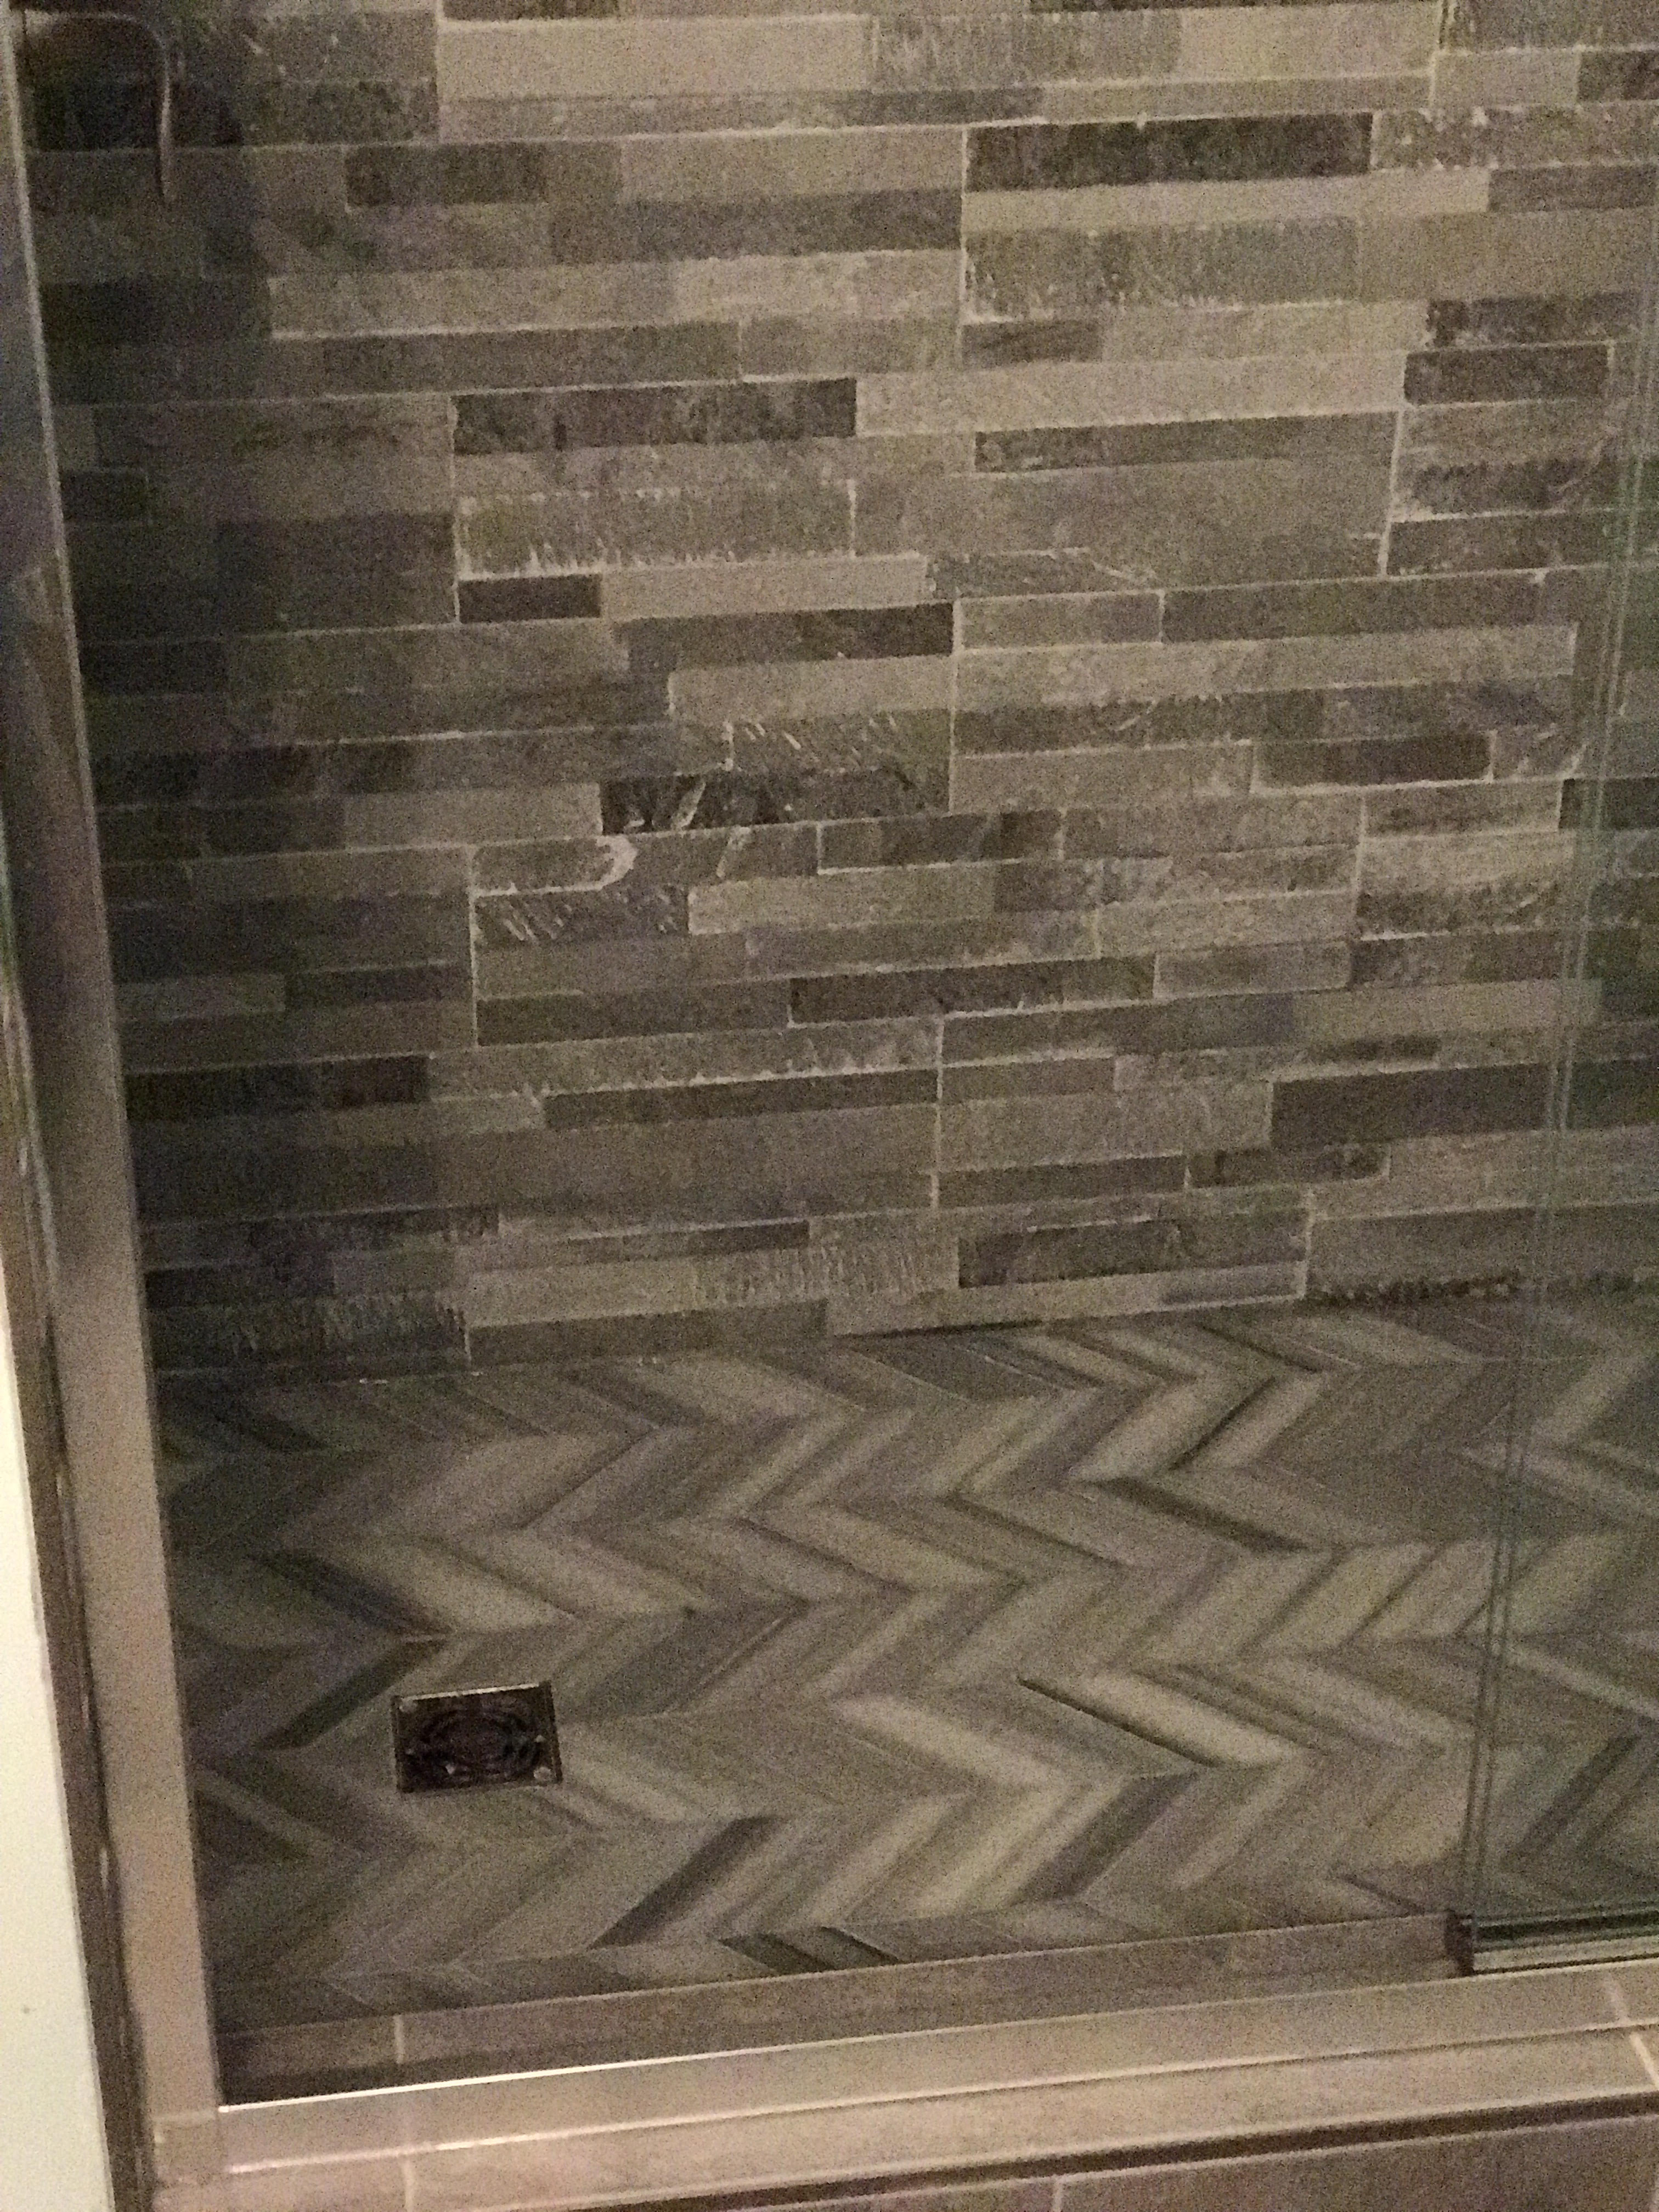 More shower tiles with two designs